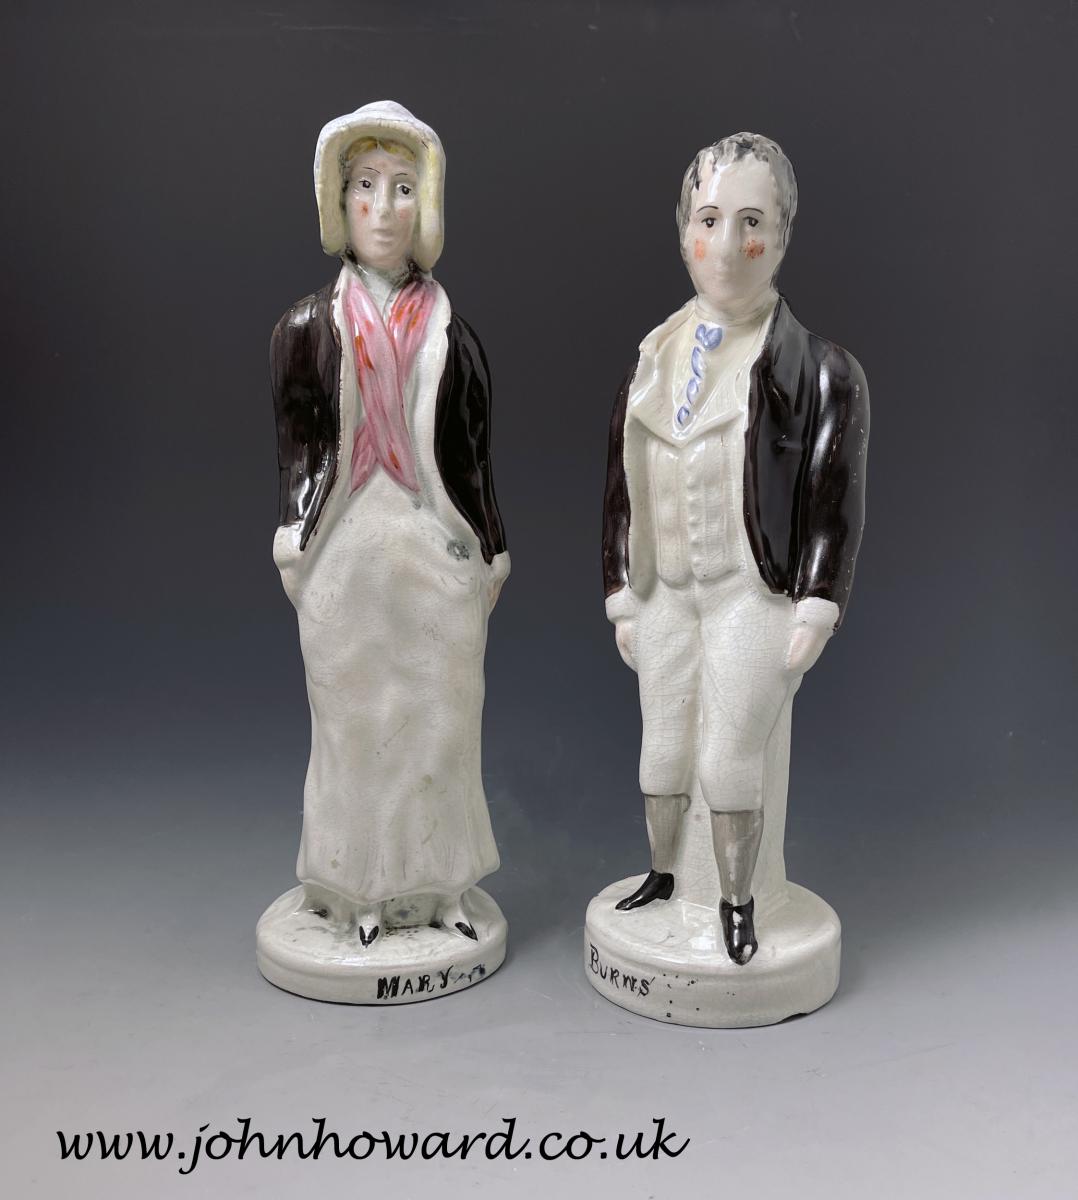 Rare pair of large scale Pottery figures of Burns and Mary, Scottish circa 1840 period